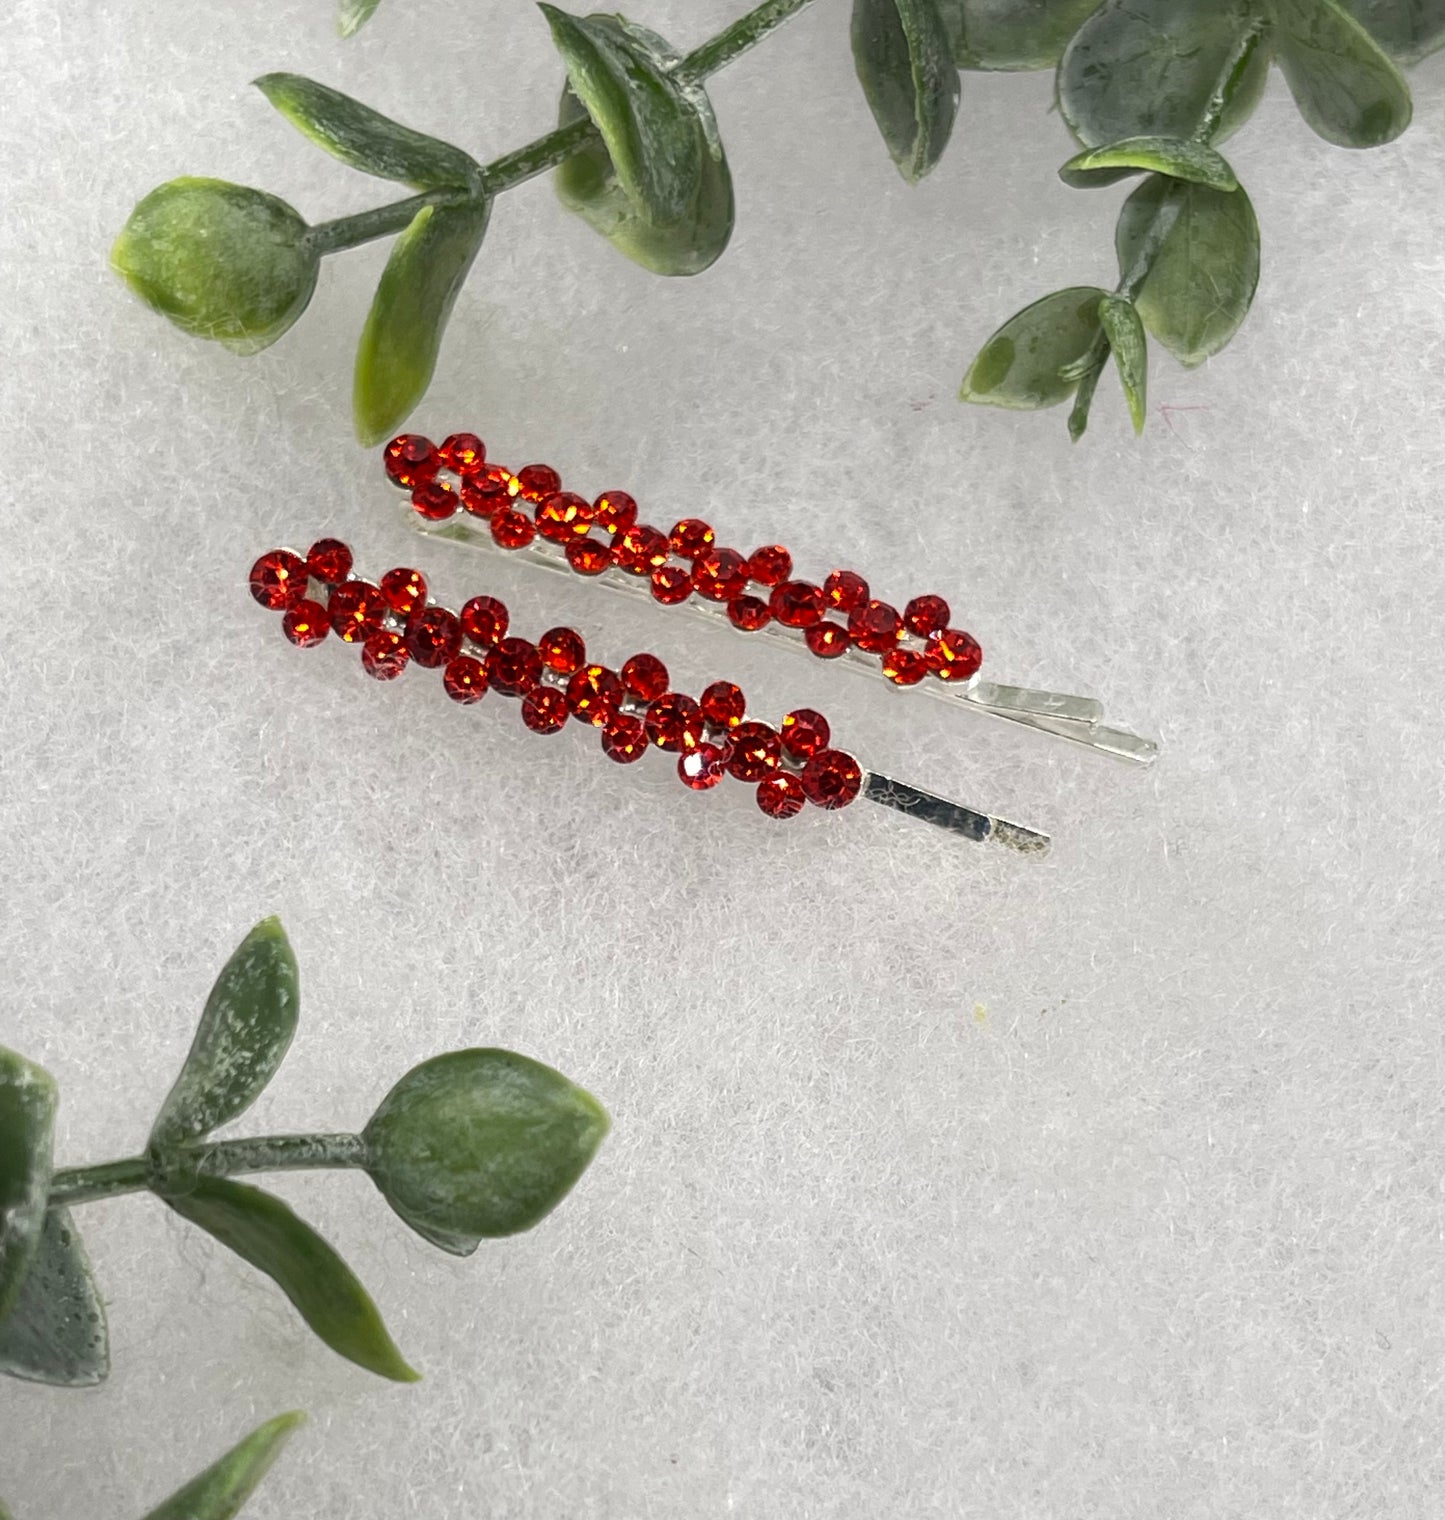 Red Crystal Rhinestone Bobby pin hair pins set approximately 2.5”  silver tone formal hair accessory gift